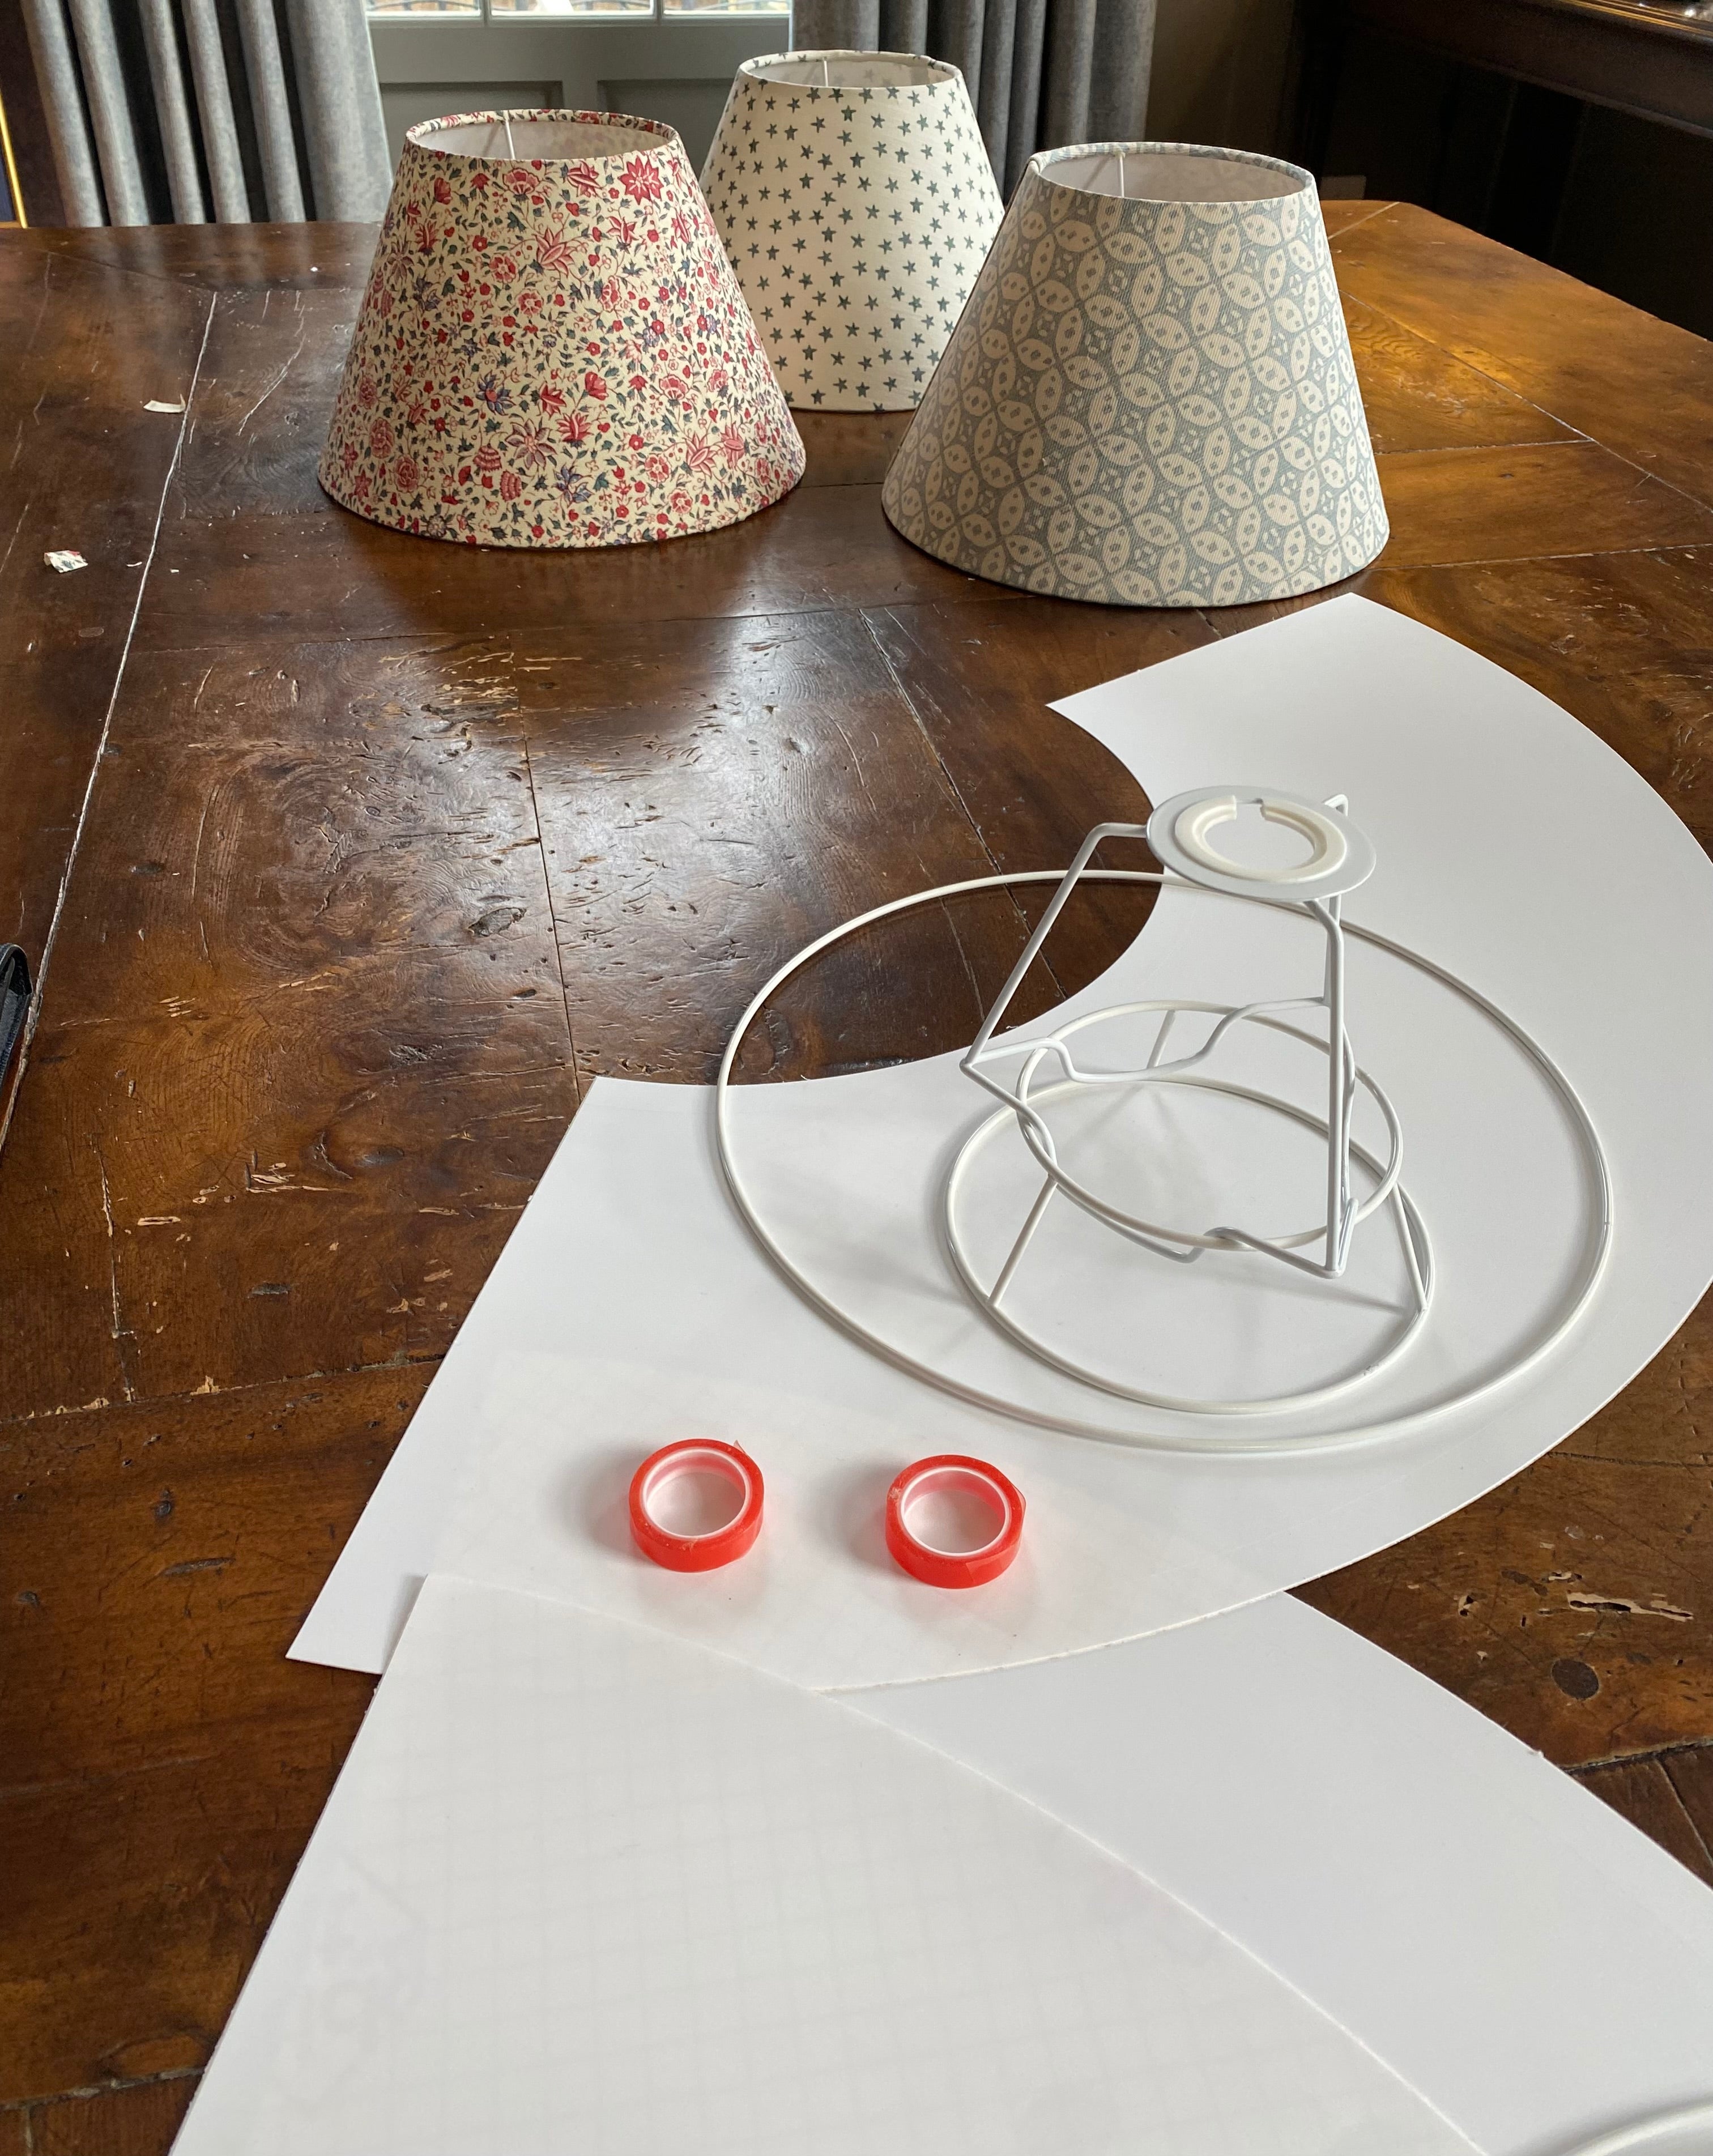 Lampshade Workshop for Beginners - 7th June 2024